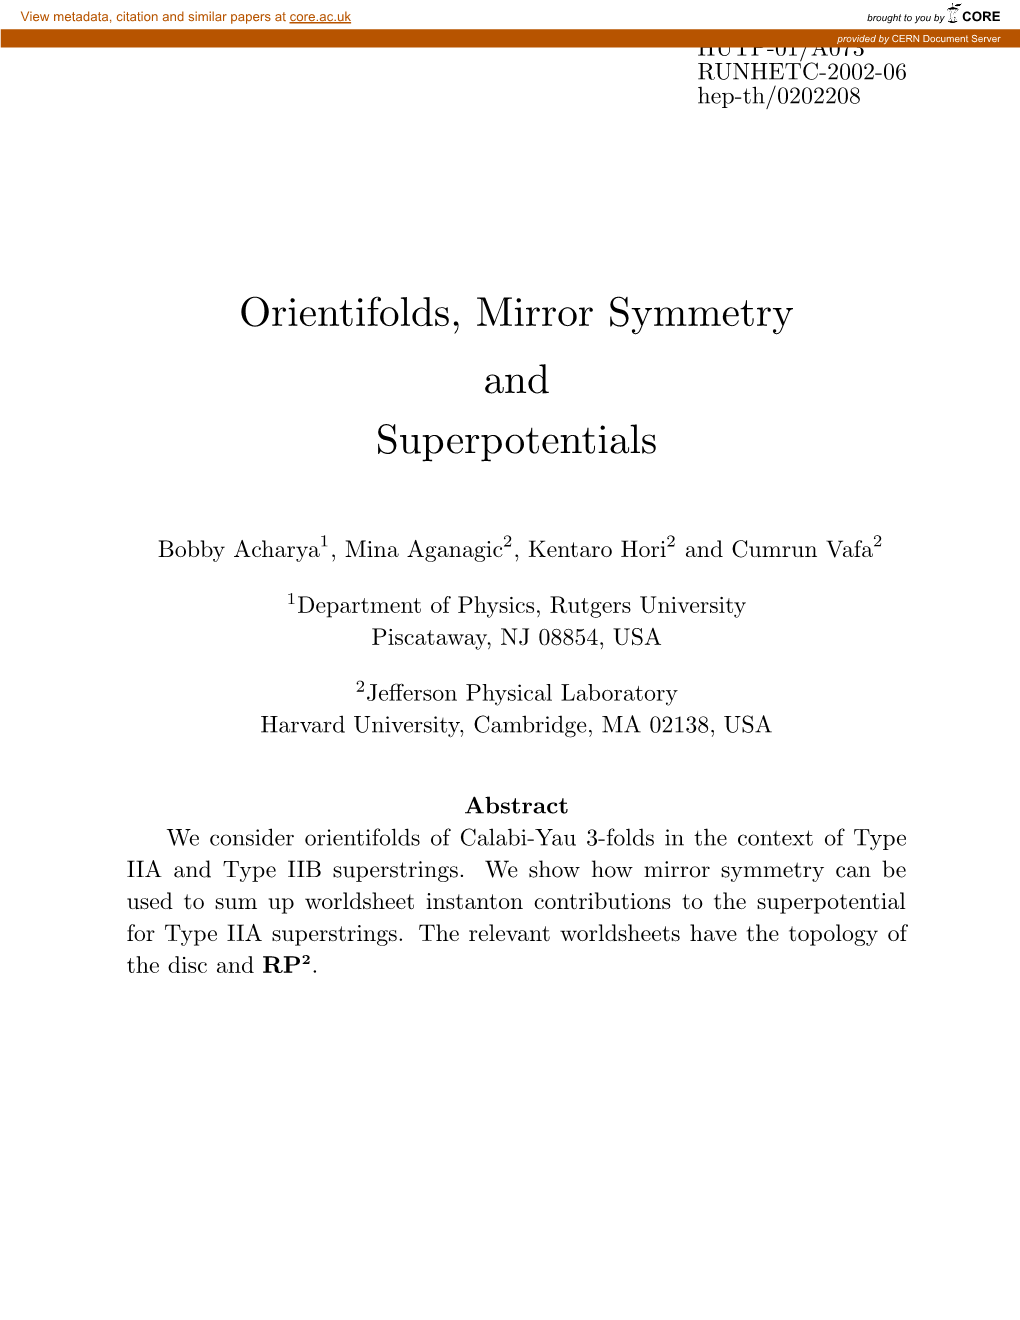 Orientifolds, Mirror Symmetry and Superpotentials